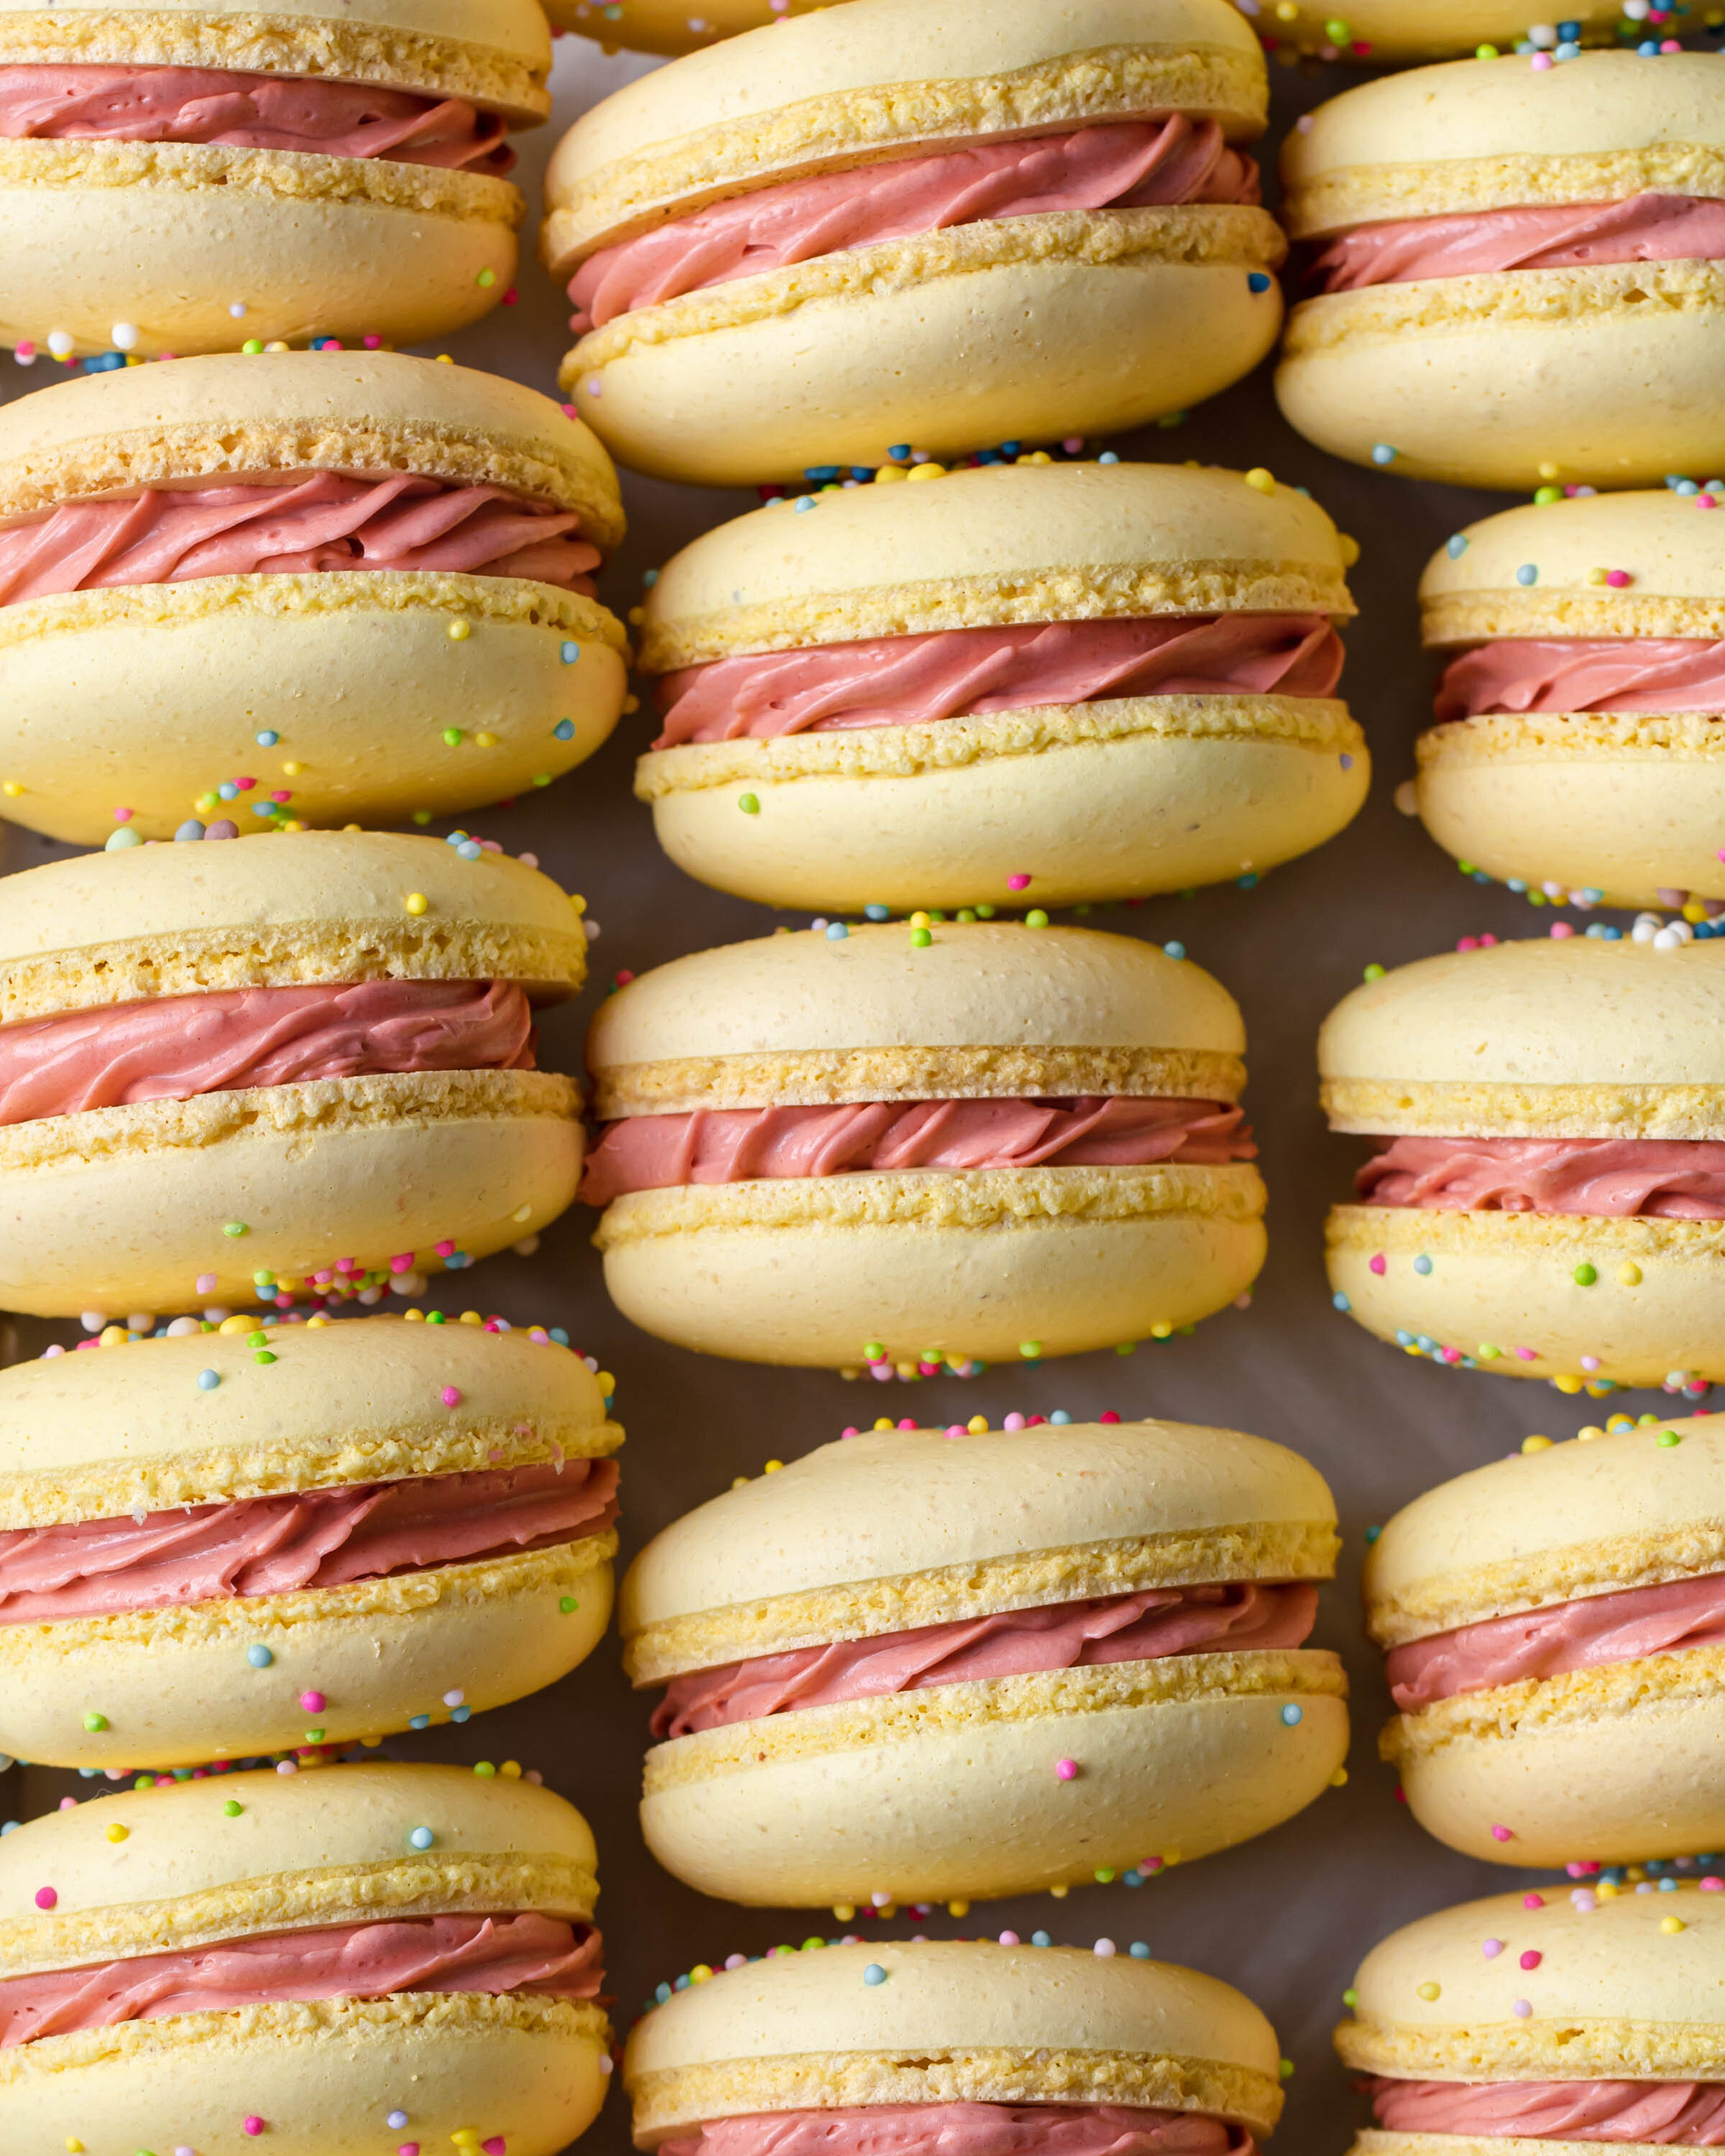 A close-up picture of yellow French macarons with sprinkles and pink buttercream filling